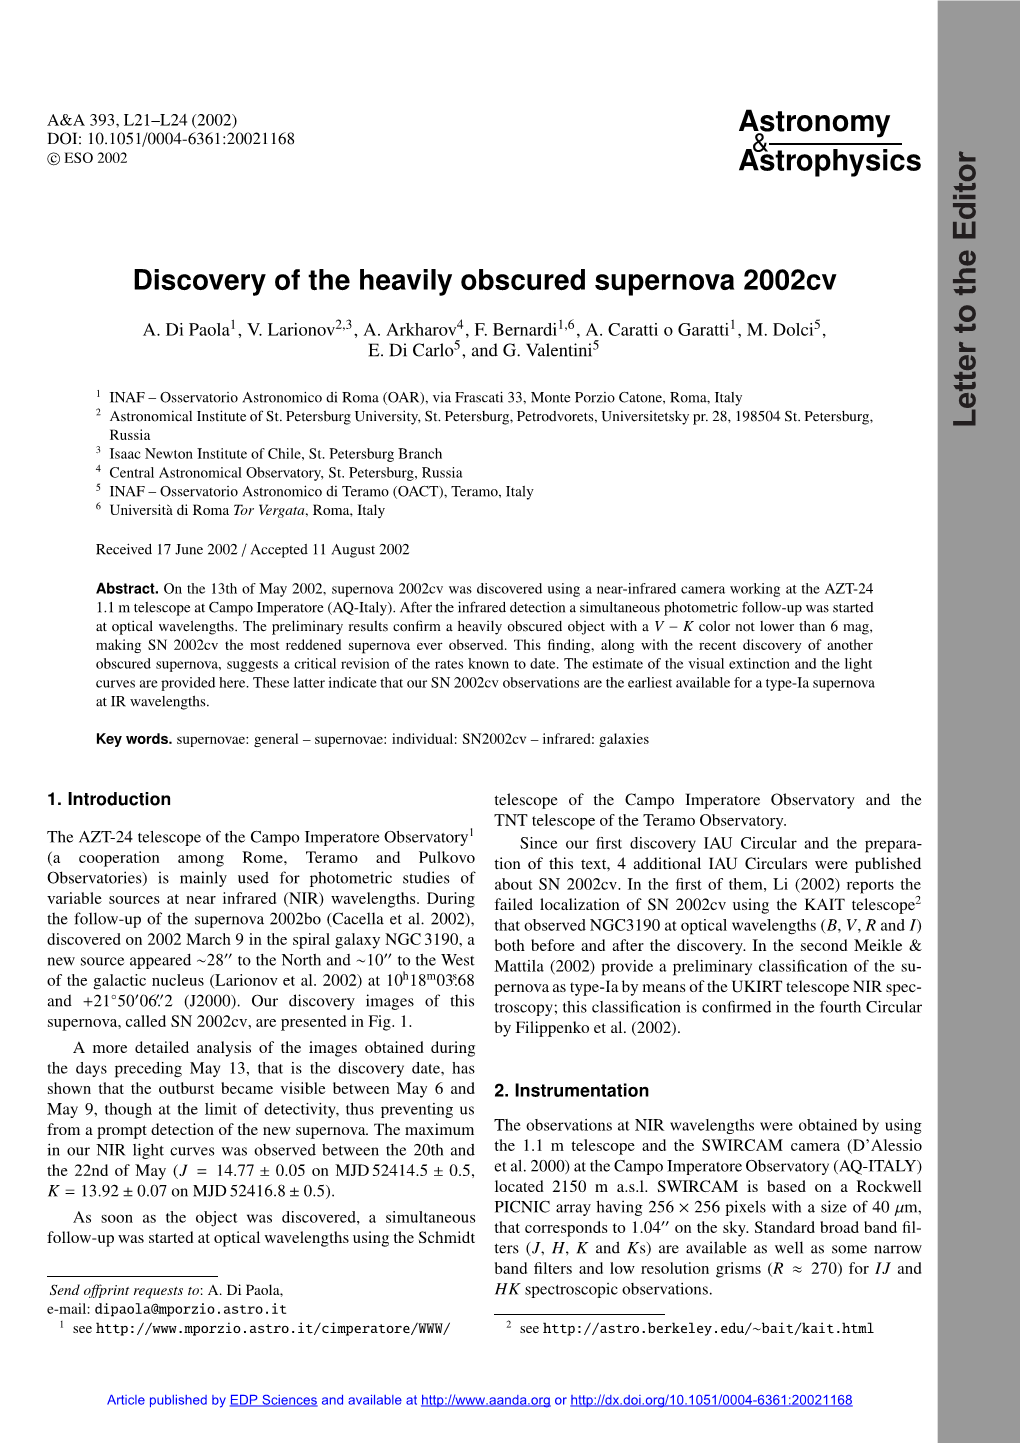 Discovery of the Heavily Obscured Supernova 2002Cv